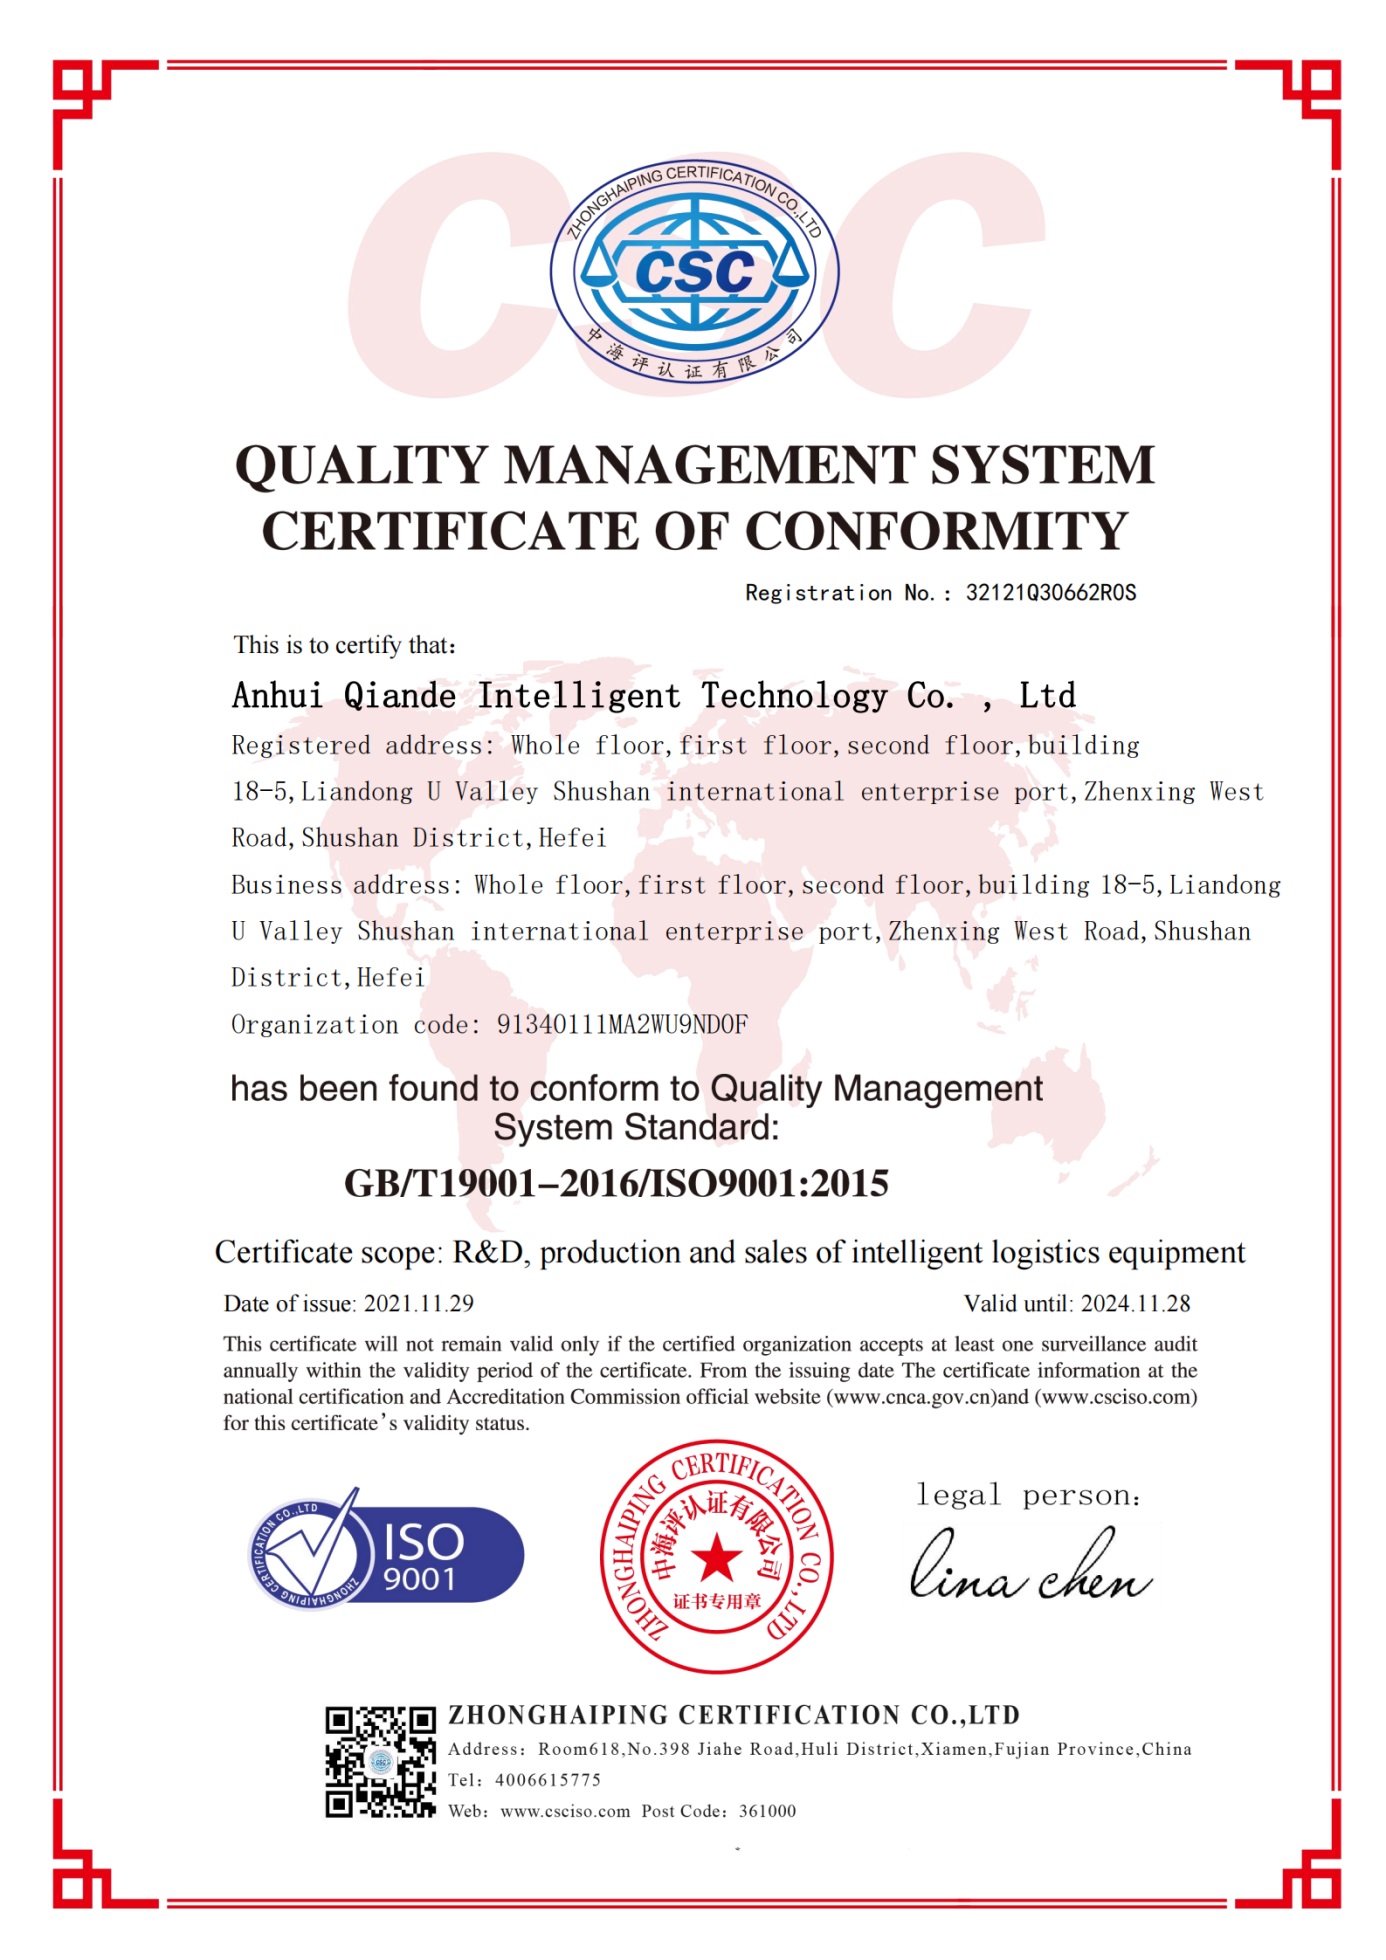 Quality Management System Certificate of Conformity.jpg